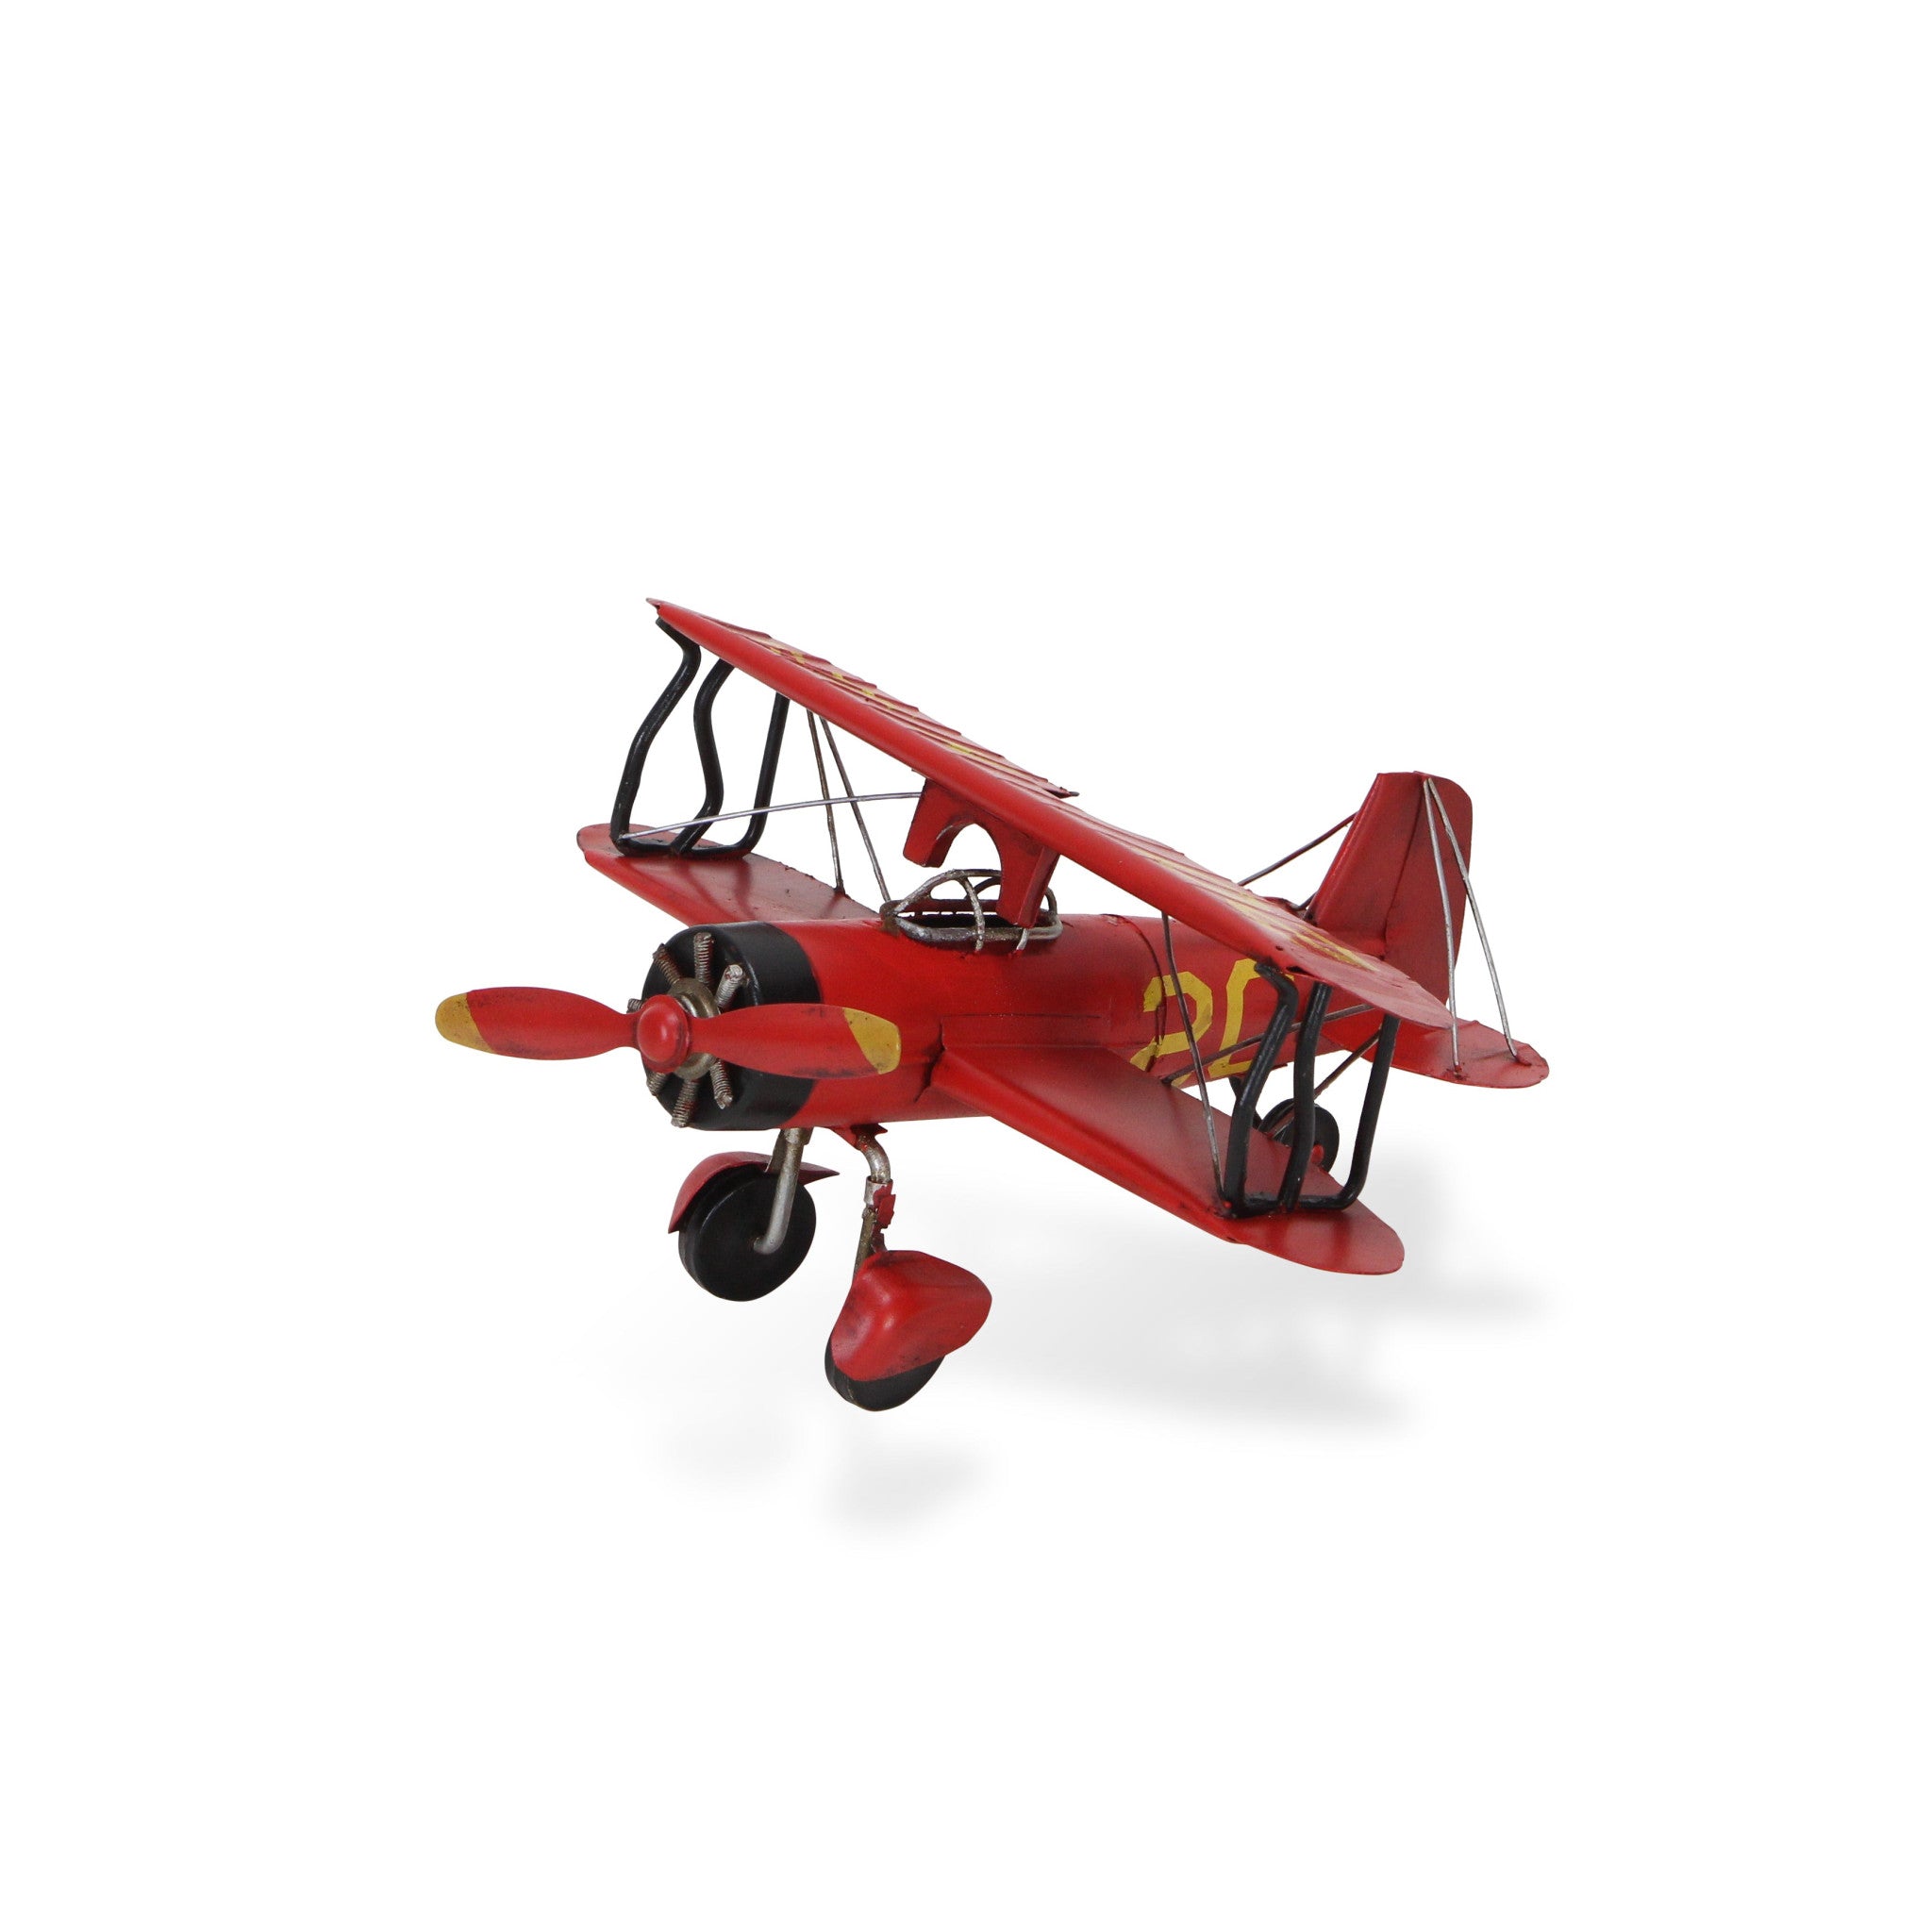 5" Red and Black Metal Hand Painted Model Airplane